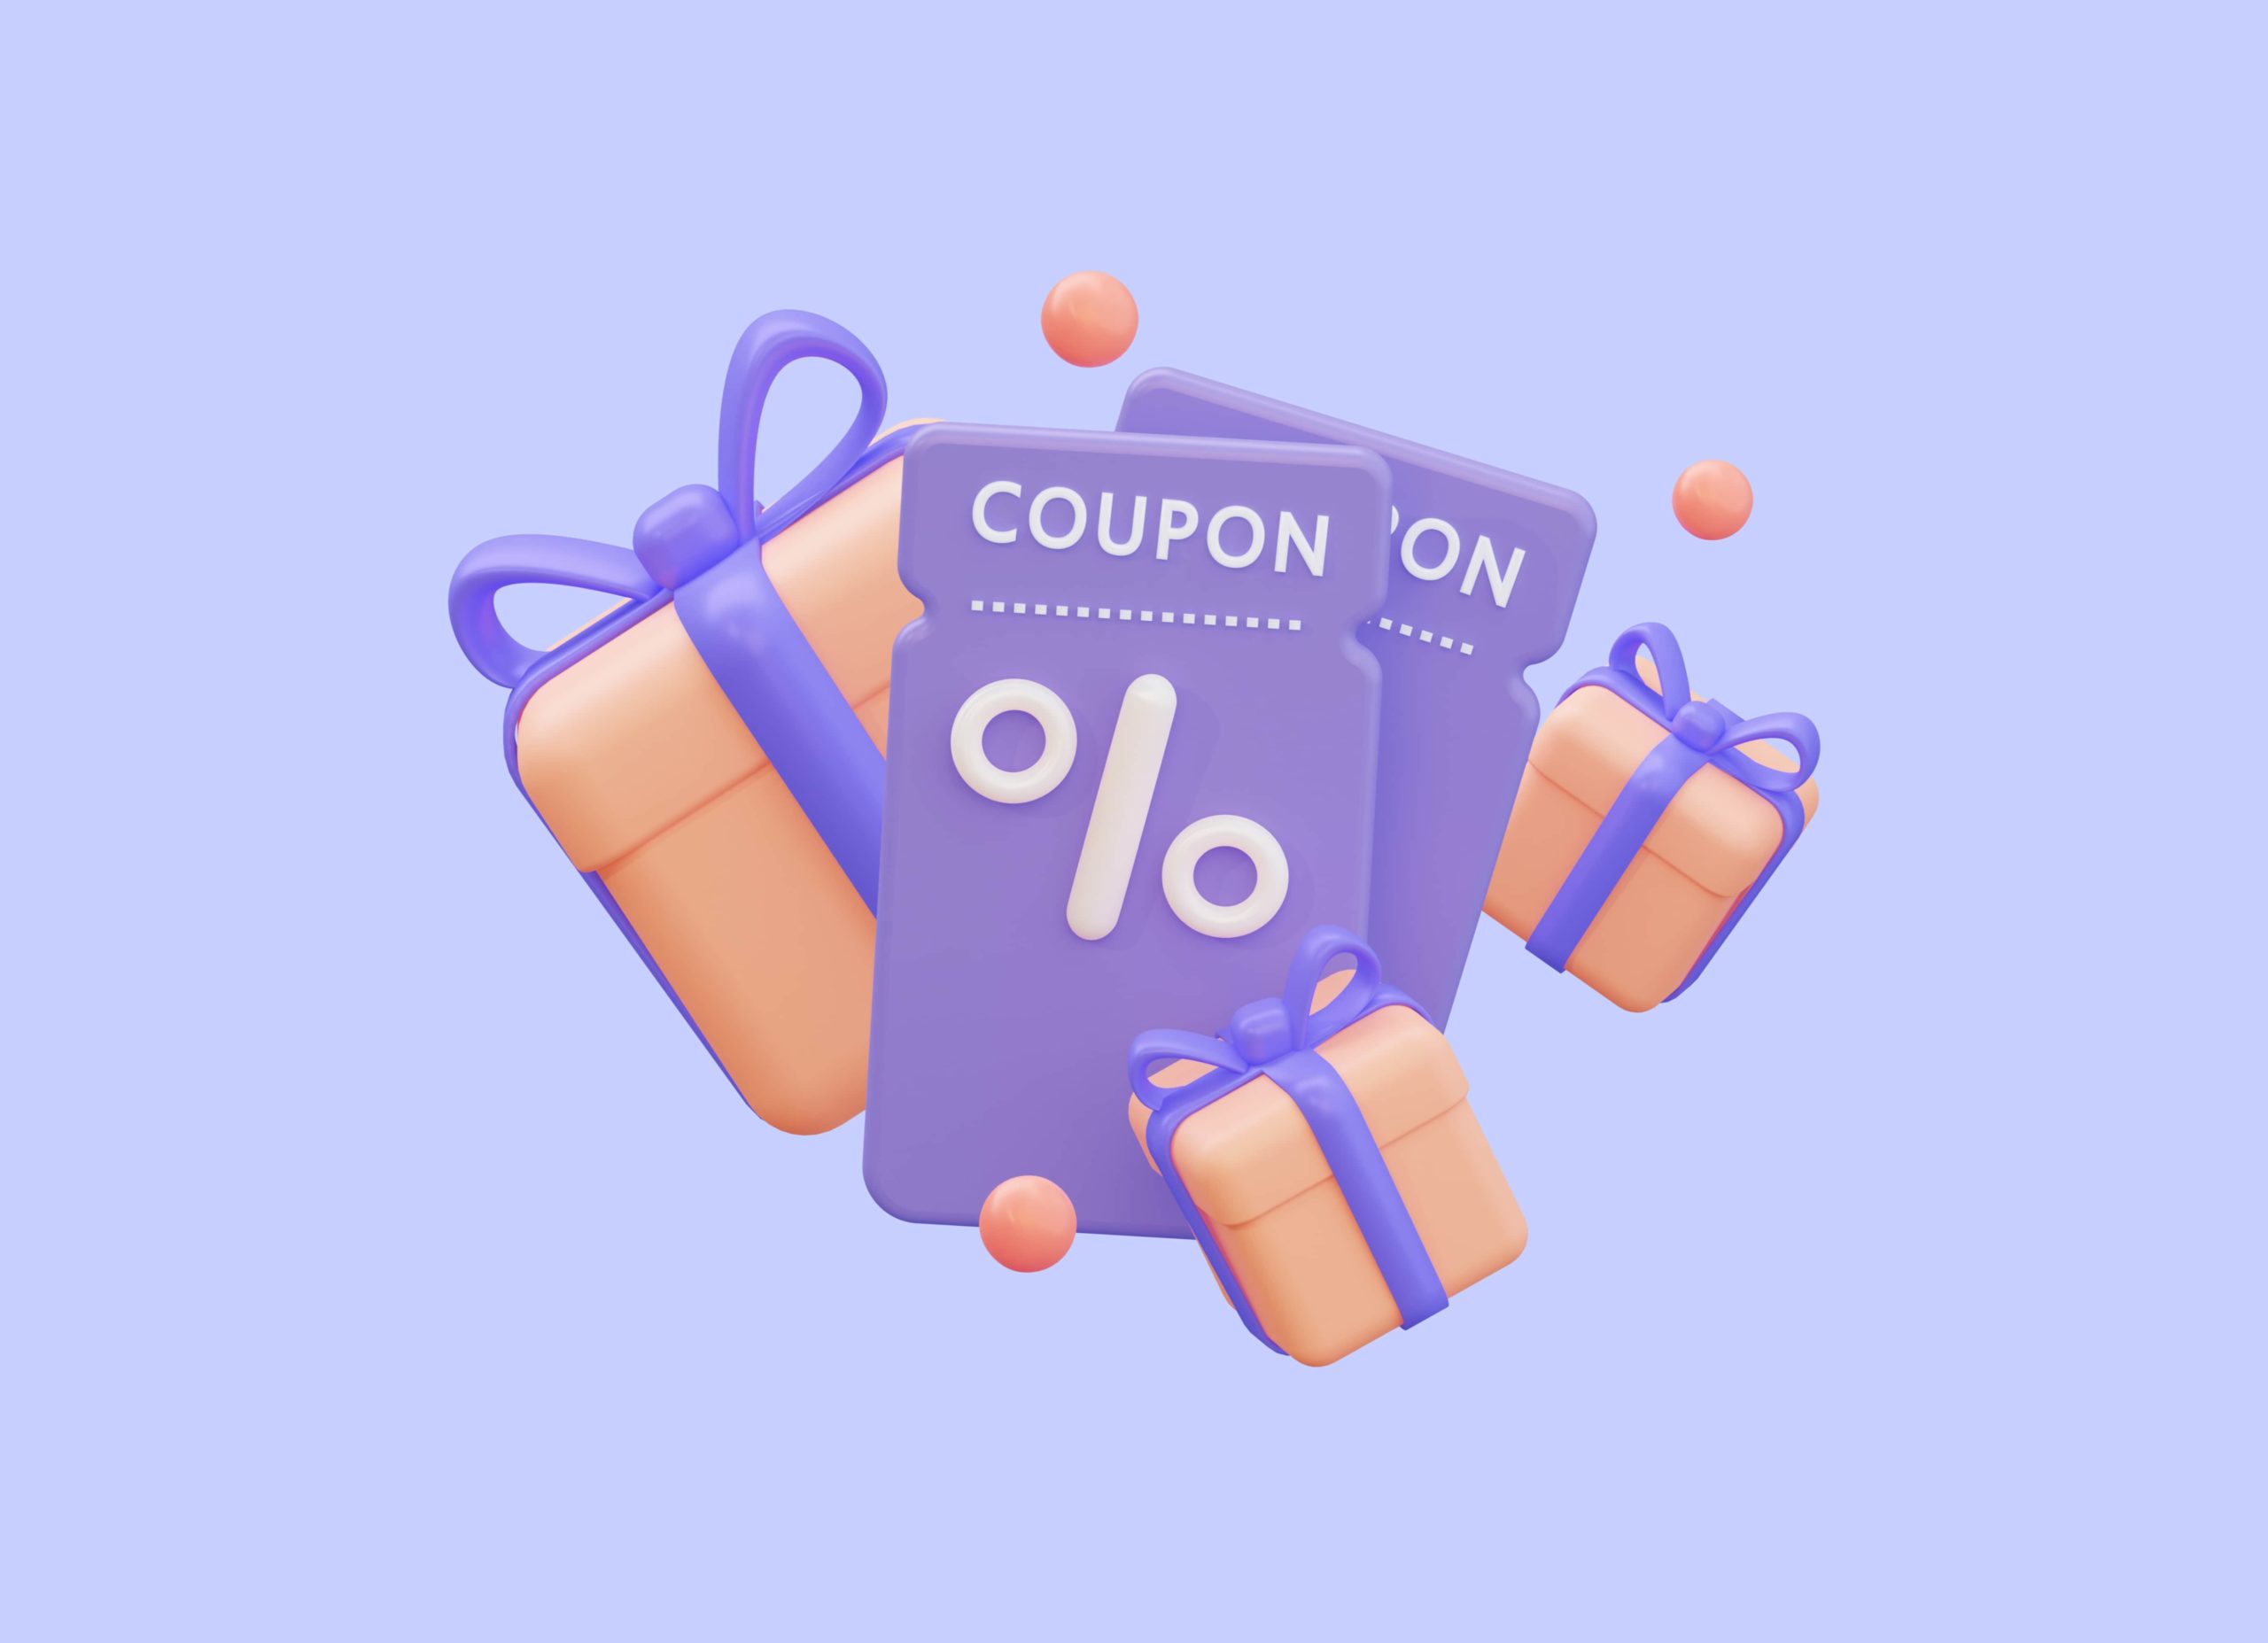 11.11 Sale: This coupon code can't be used in combination with